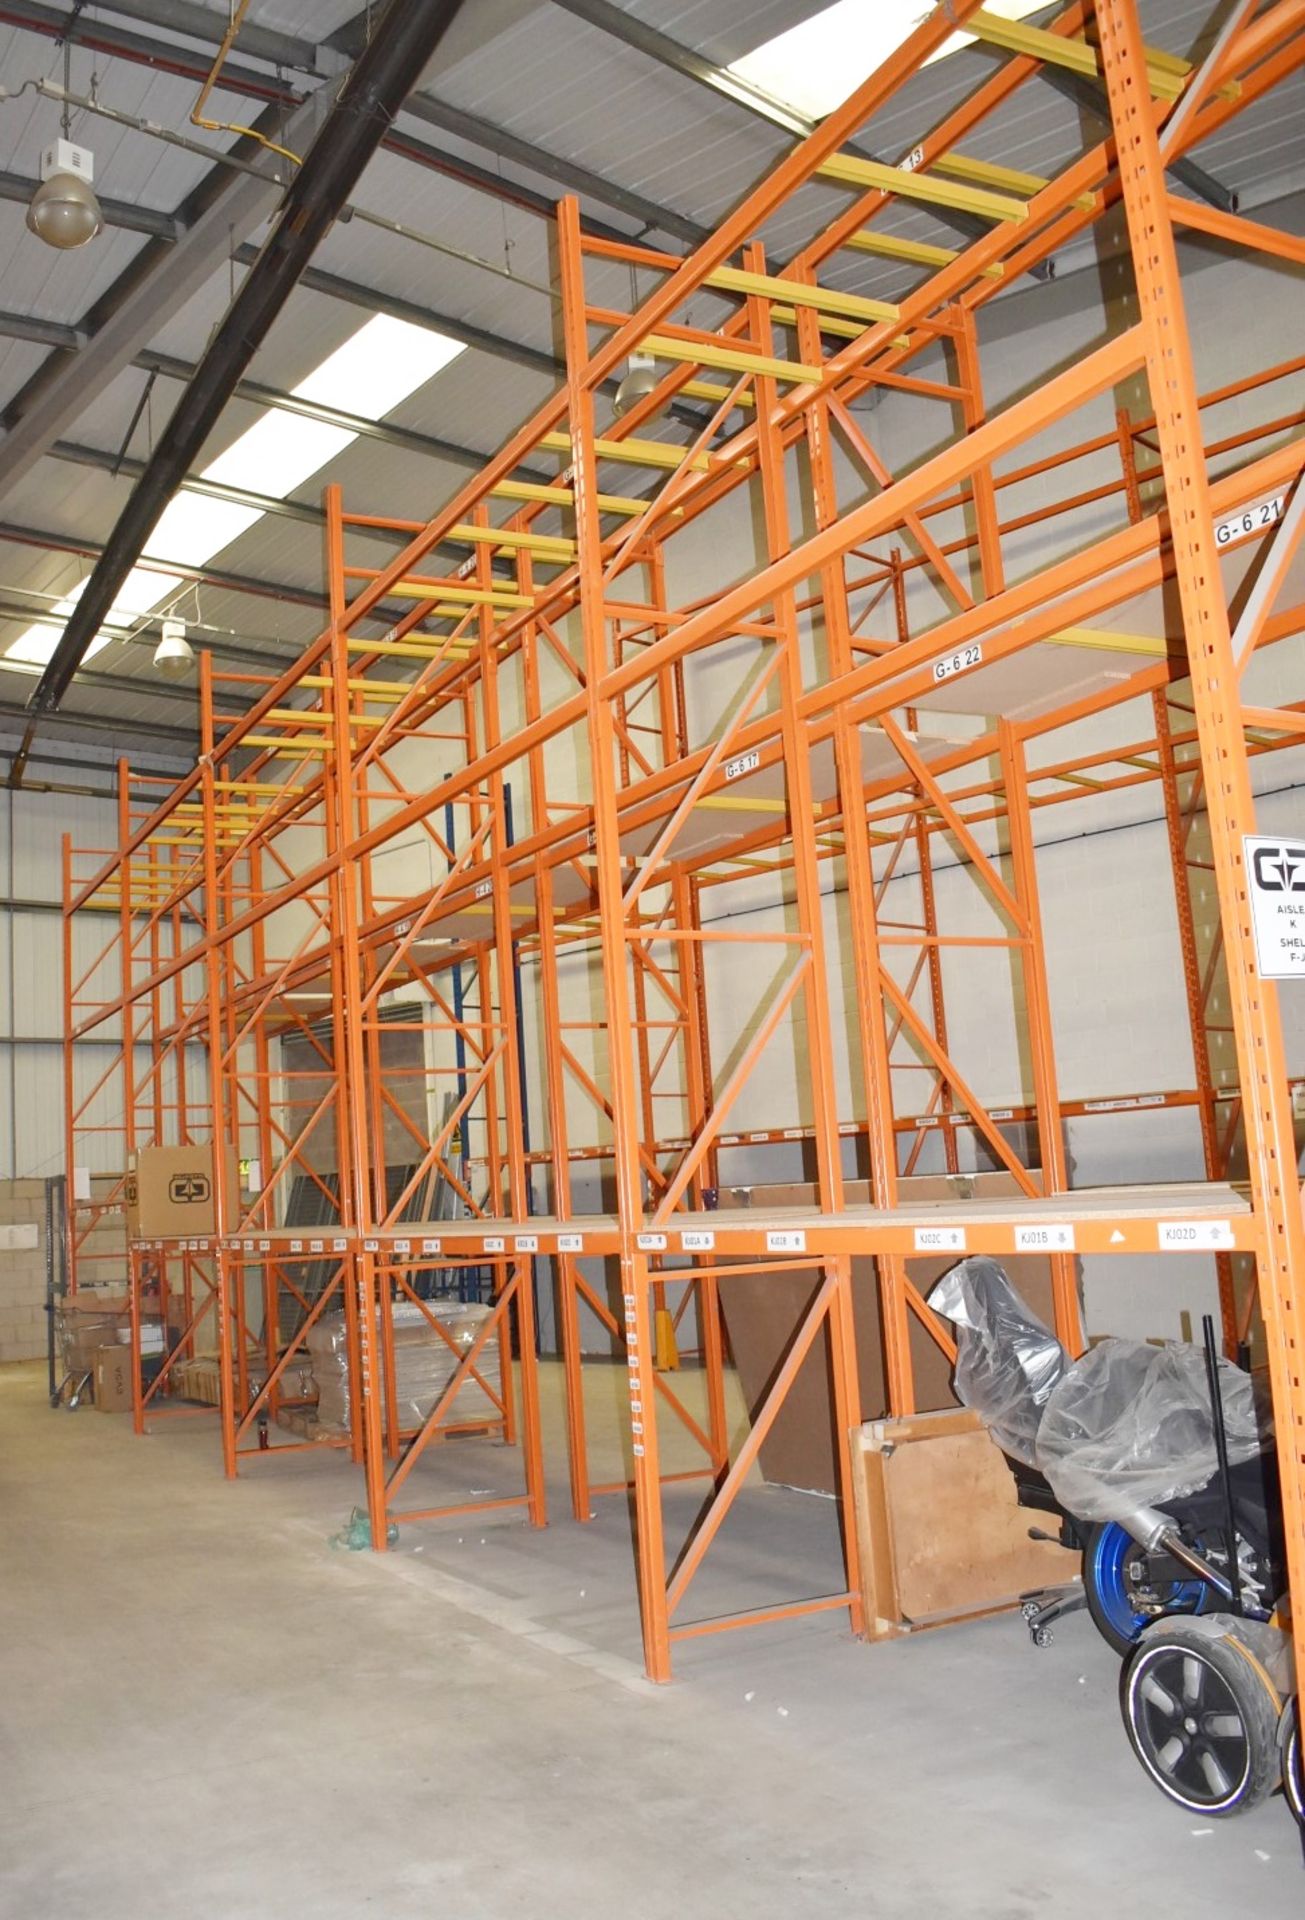 5 x Bays of RediRack Warehouse Pallet Racking - Lot Includes 6 x Uprights and 30 x Crossbeams - - Image 2 of 5